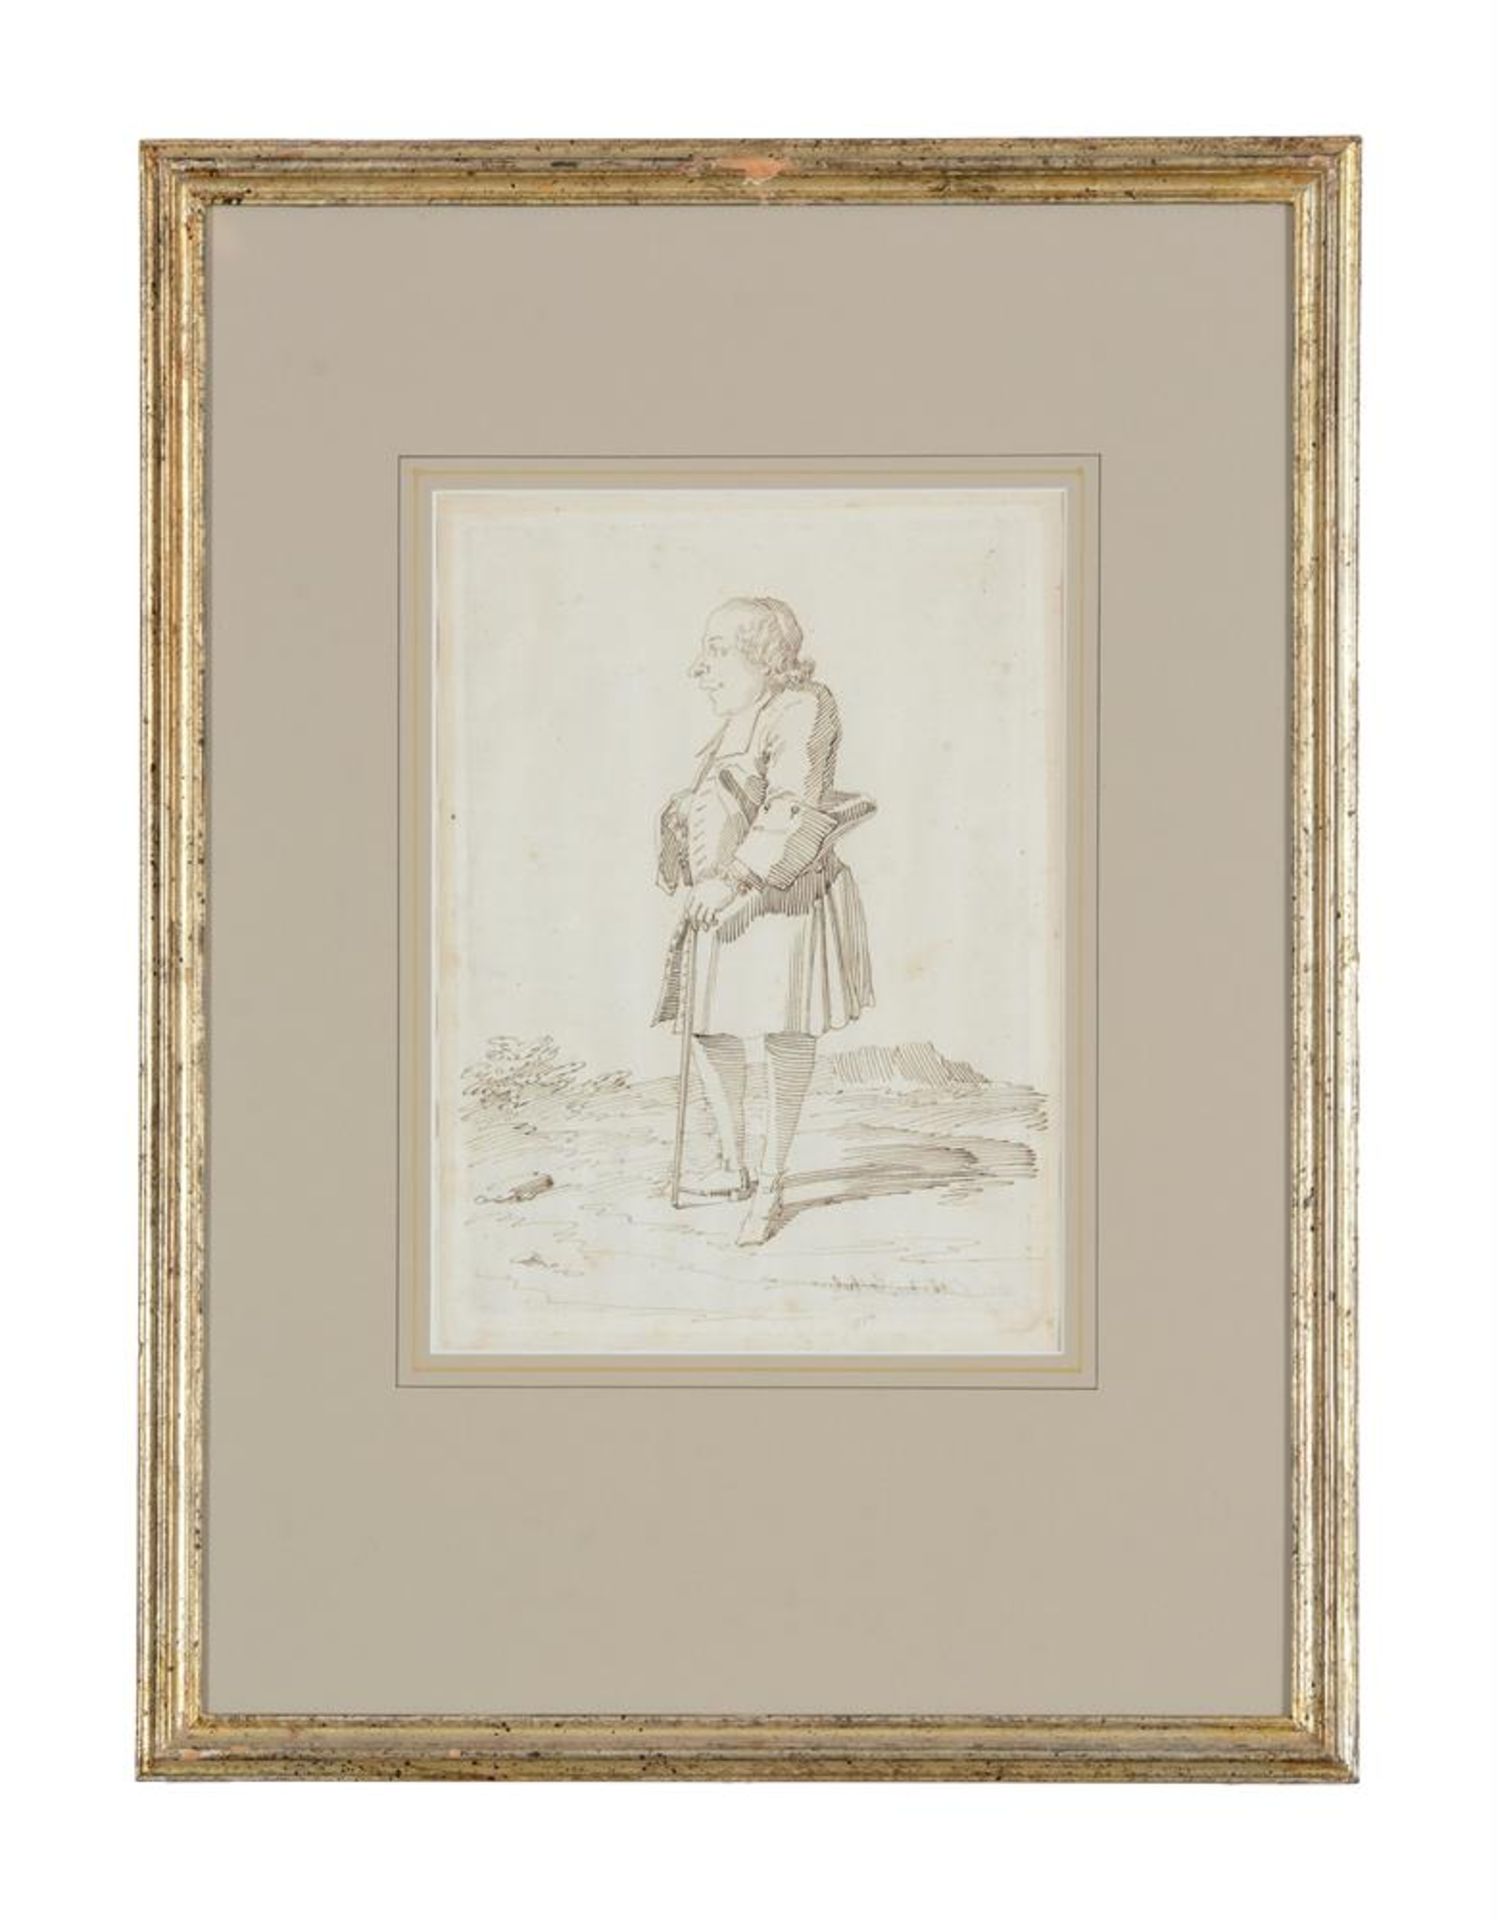 PIER LEONE GHEZZI (ITALIAN 1674-1755), SIXTEEN CARICATURES OF ARISTOCRATS, CLERICS AND TRAVELLERS - Image 33 of 48